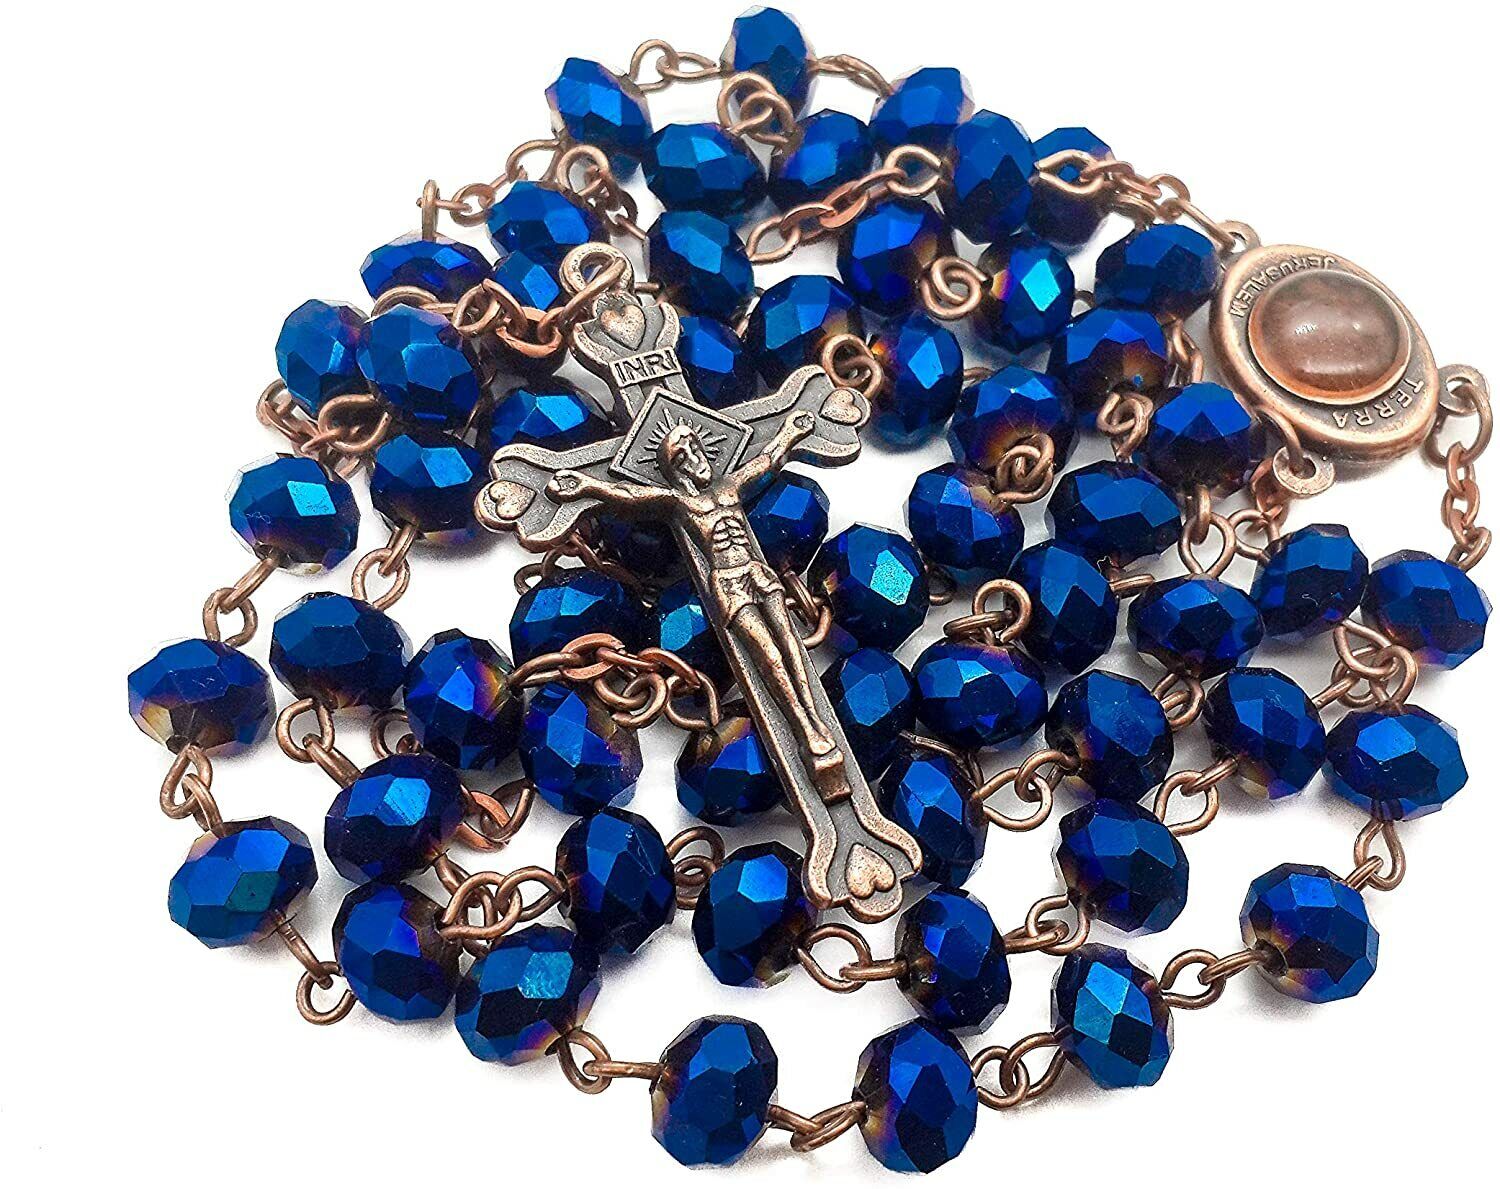 Deep Blue Crystal Beads Rosary Catholic Necklace Antique Holy Soil Medal & Cross